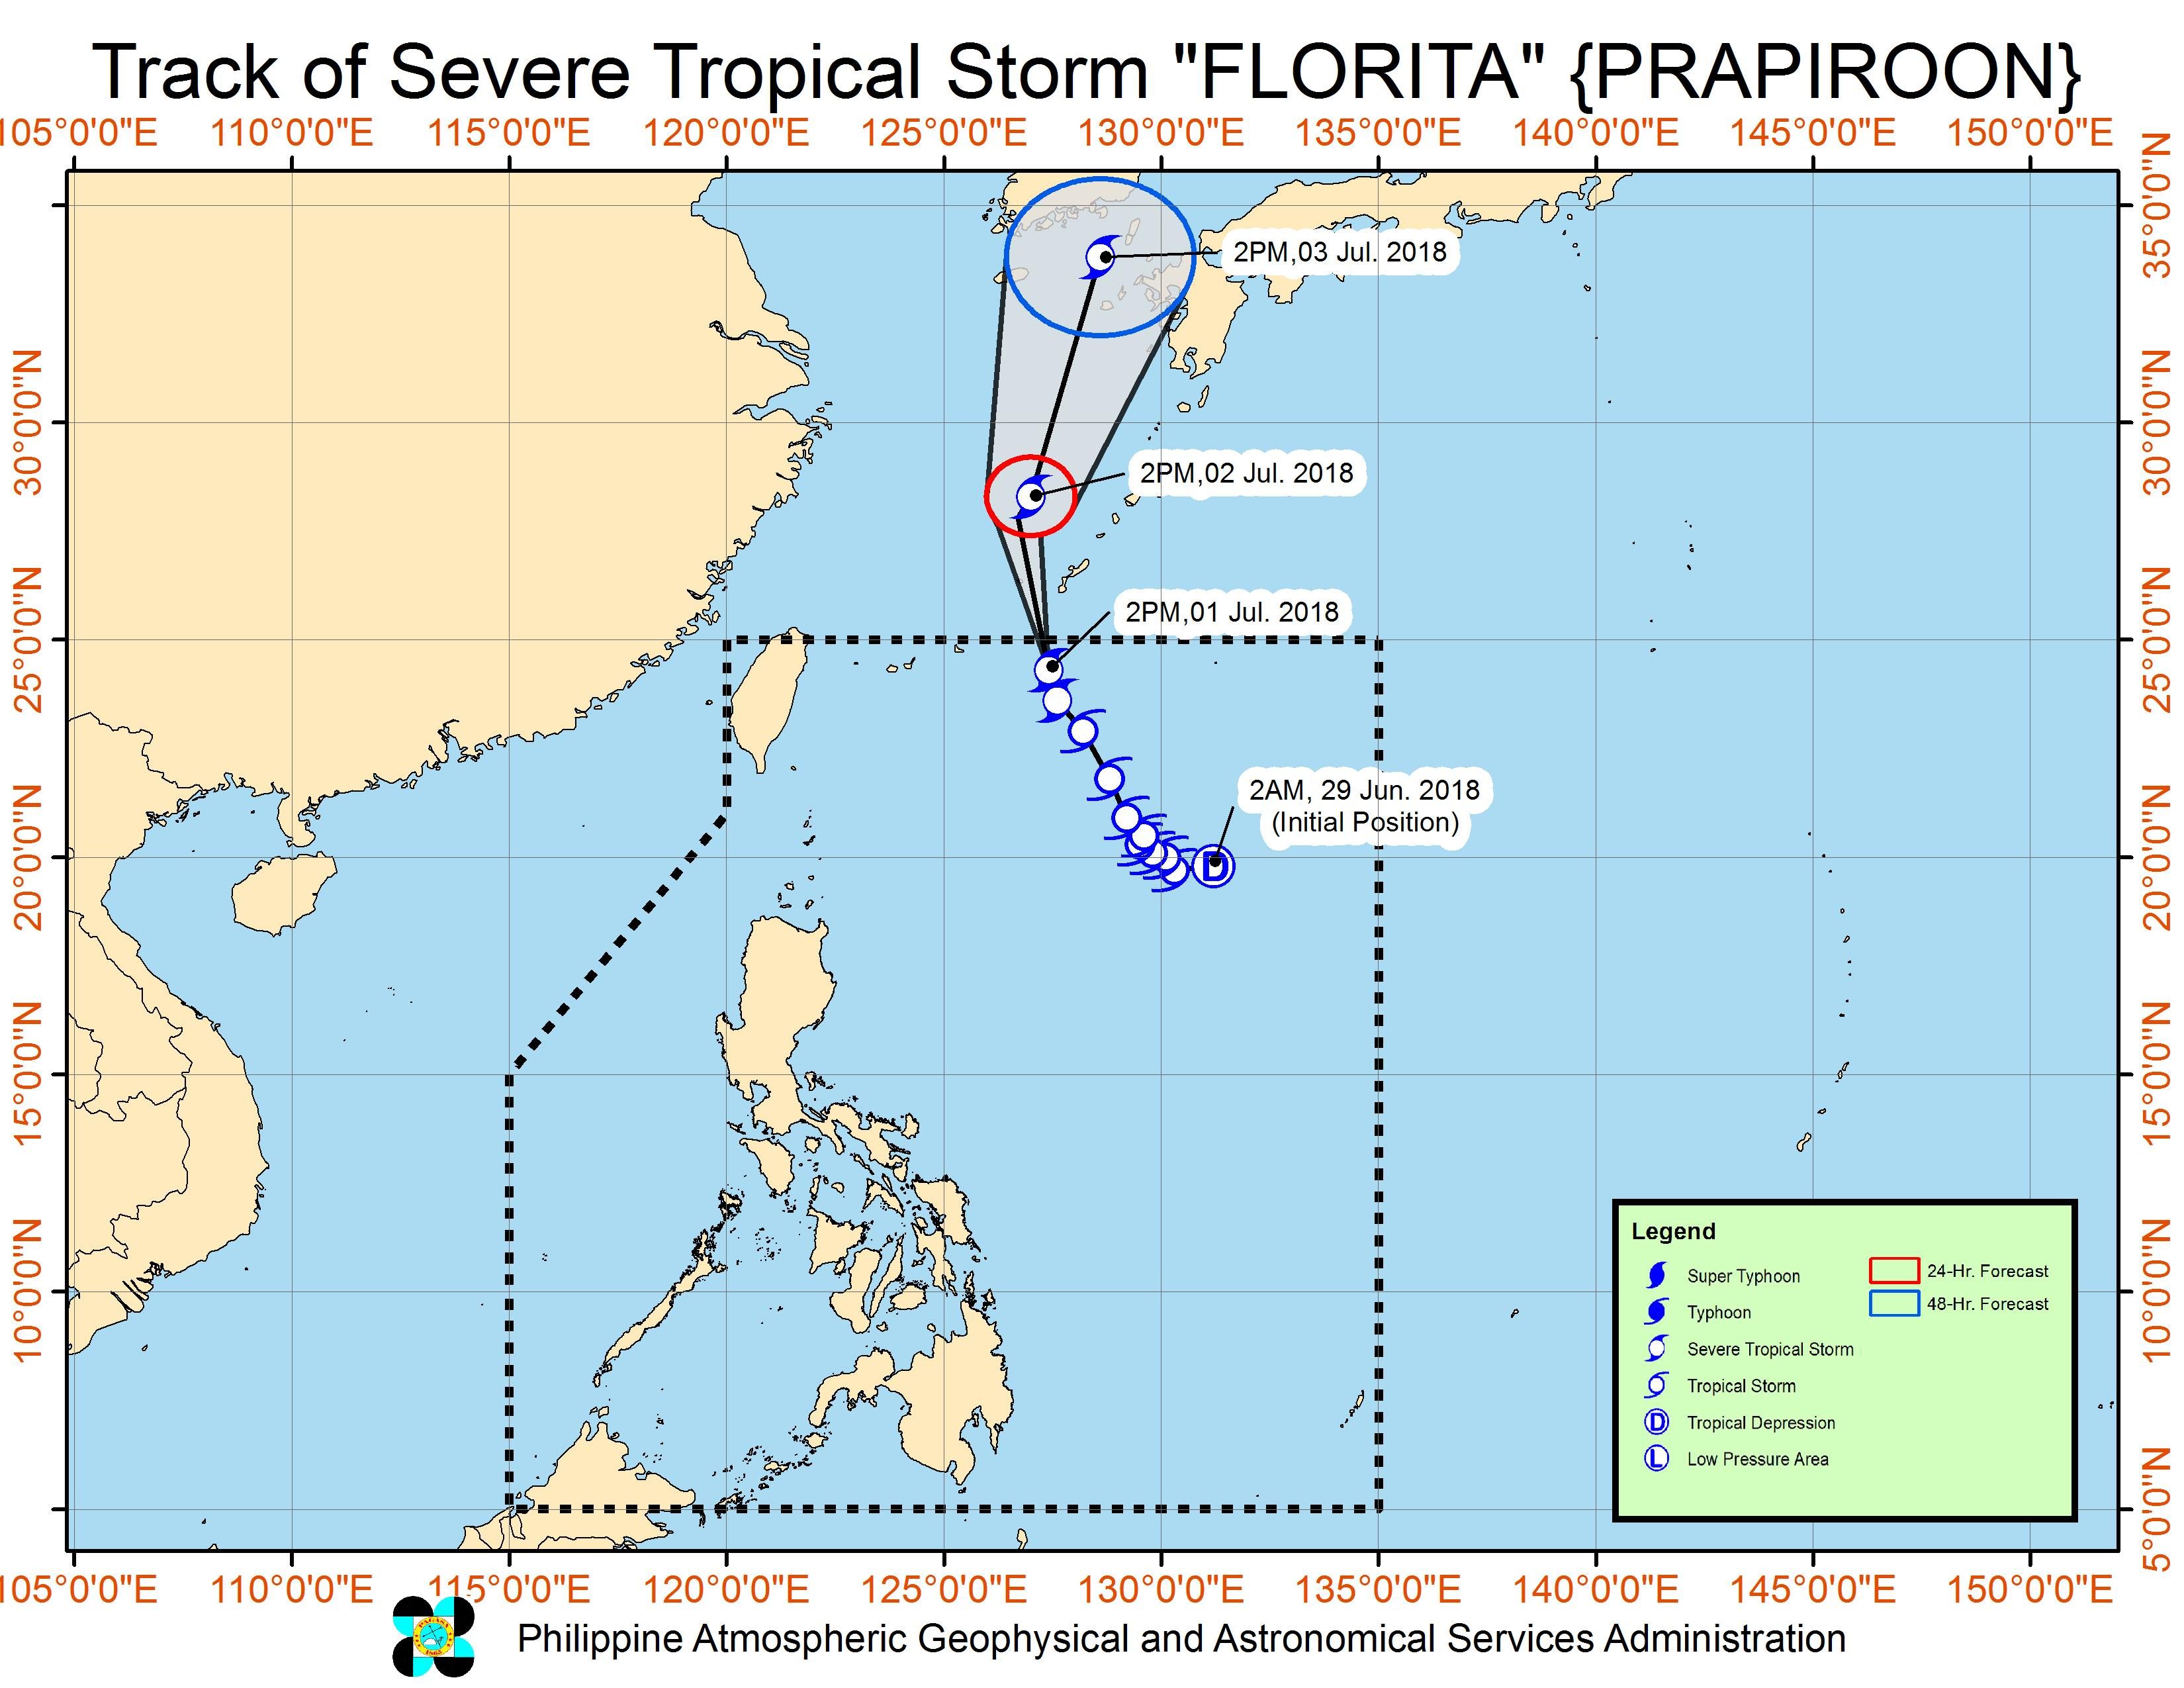 Forecast track of Severe Tropical Storm Florita (Prapiroon) as of July 1, 2018, 5:30 pm. Image courtesy of PAGASA 